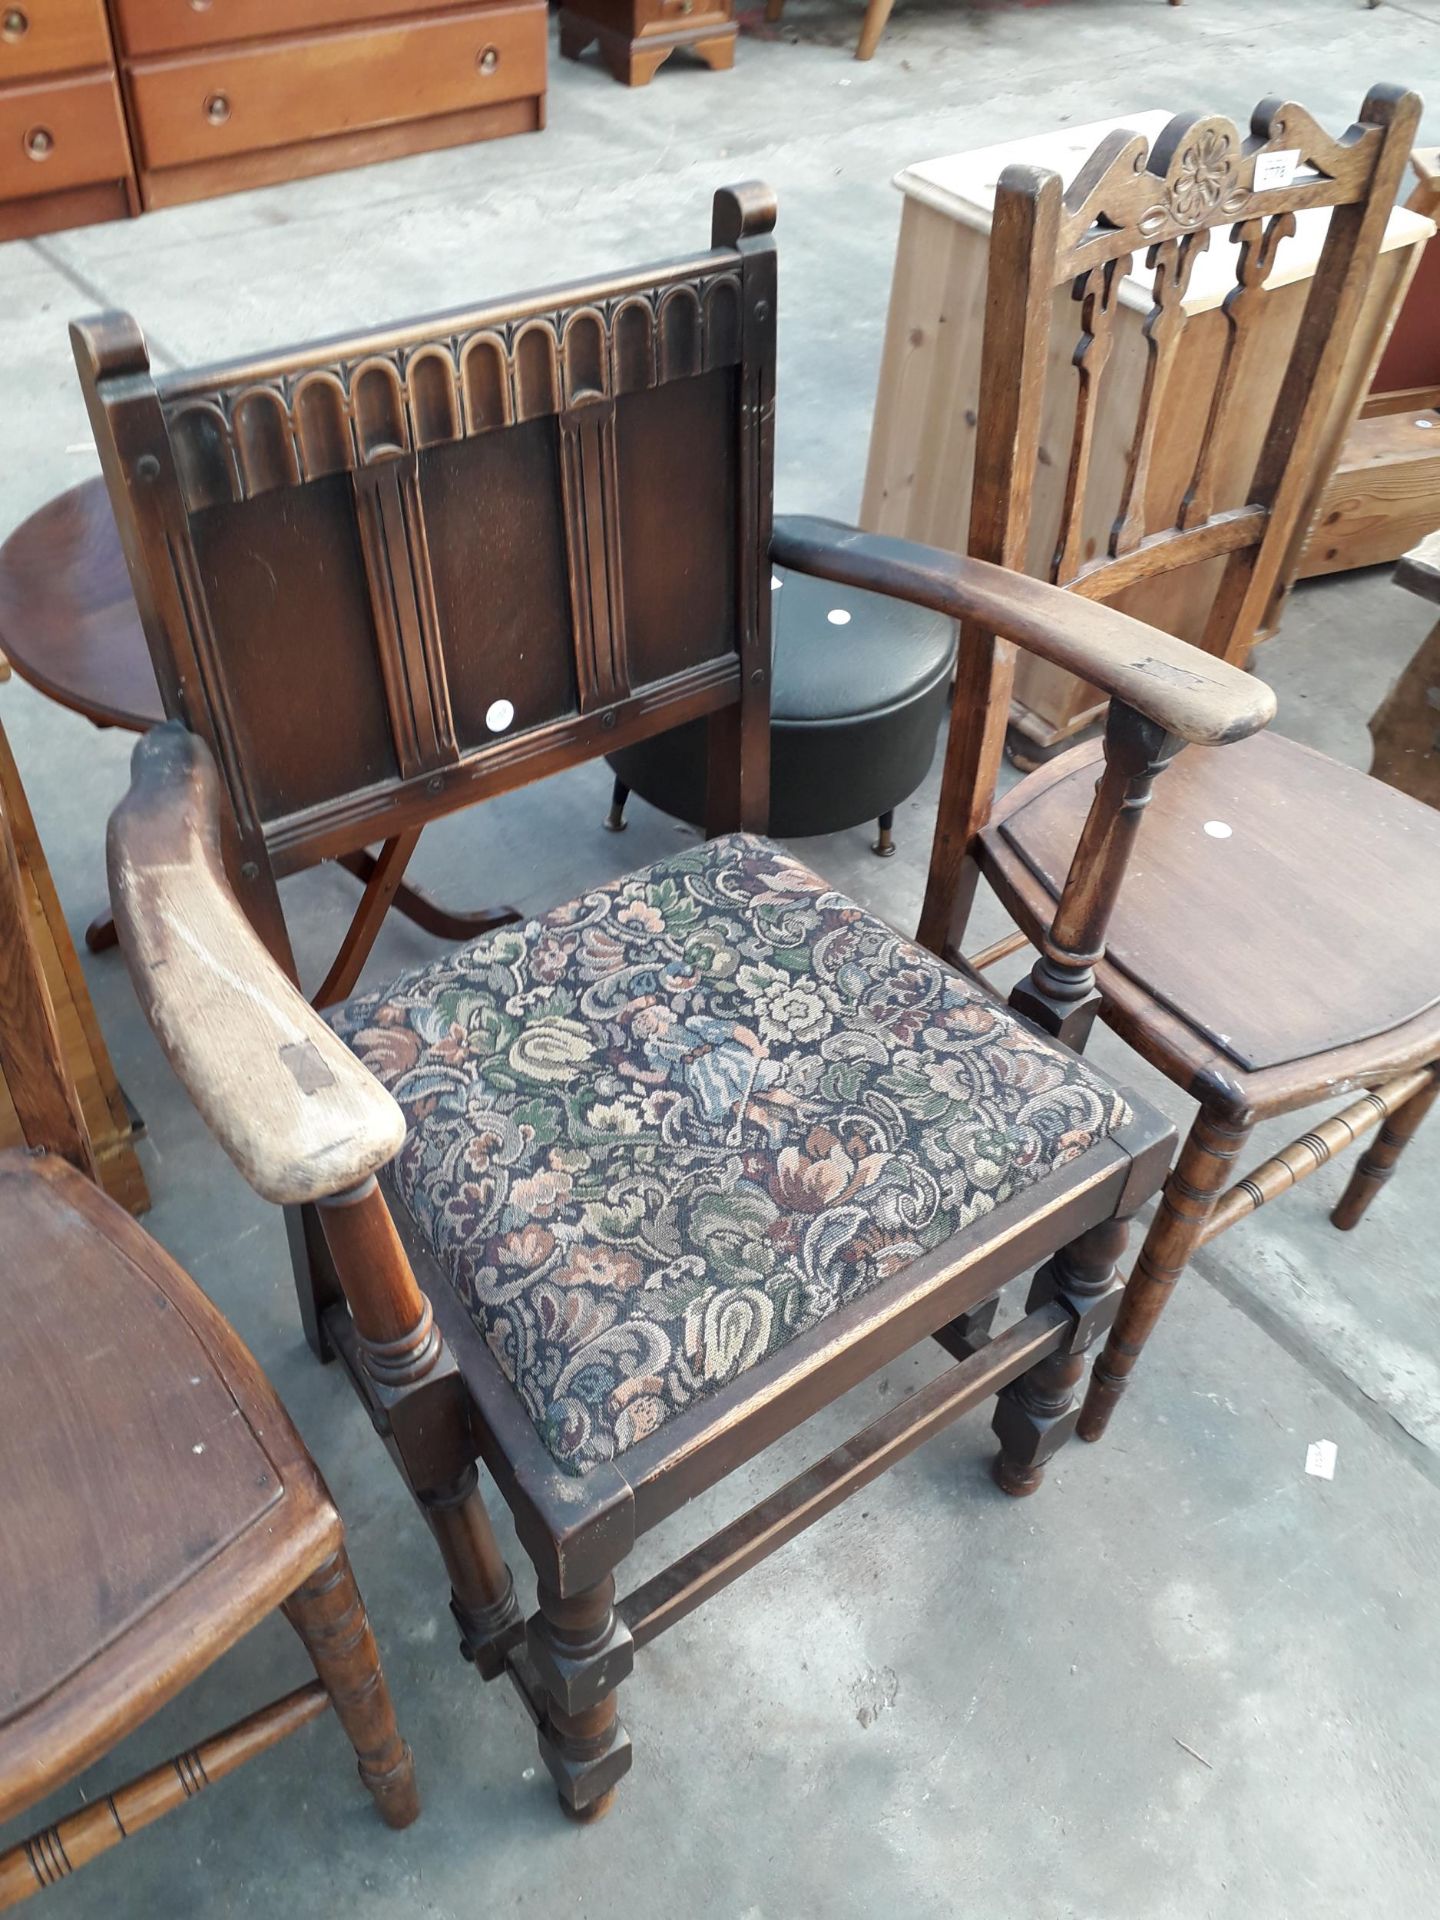 AN ERCOL BLUE LABEL ELBOW CHAIR AND PAIR OF BEDROOM CHAIRS - Image 2 of 2